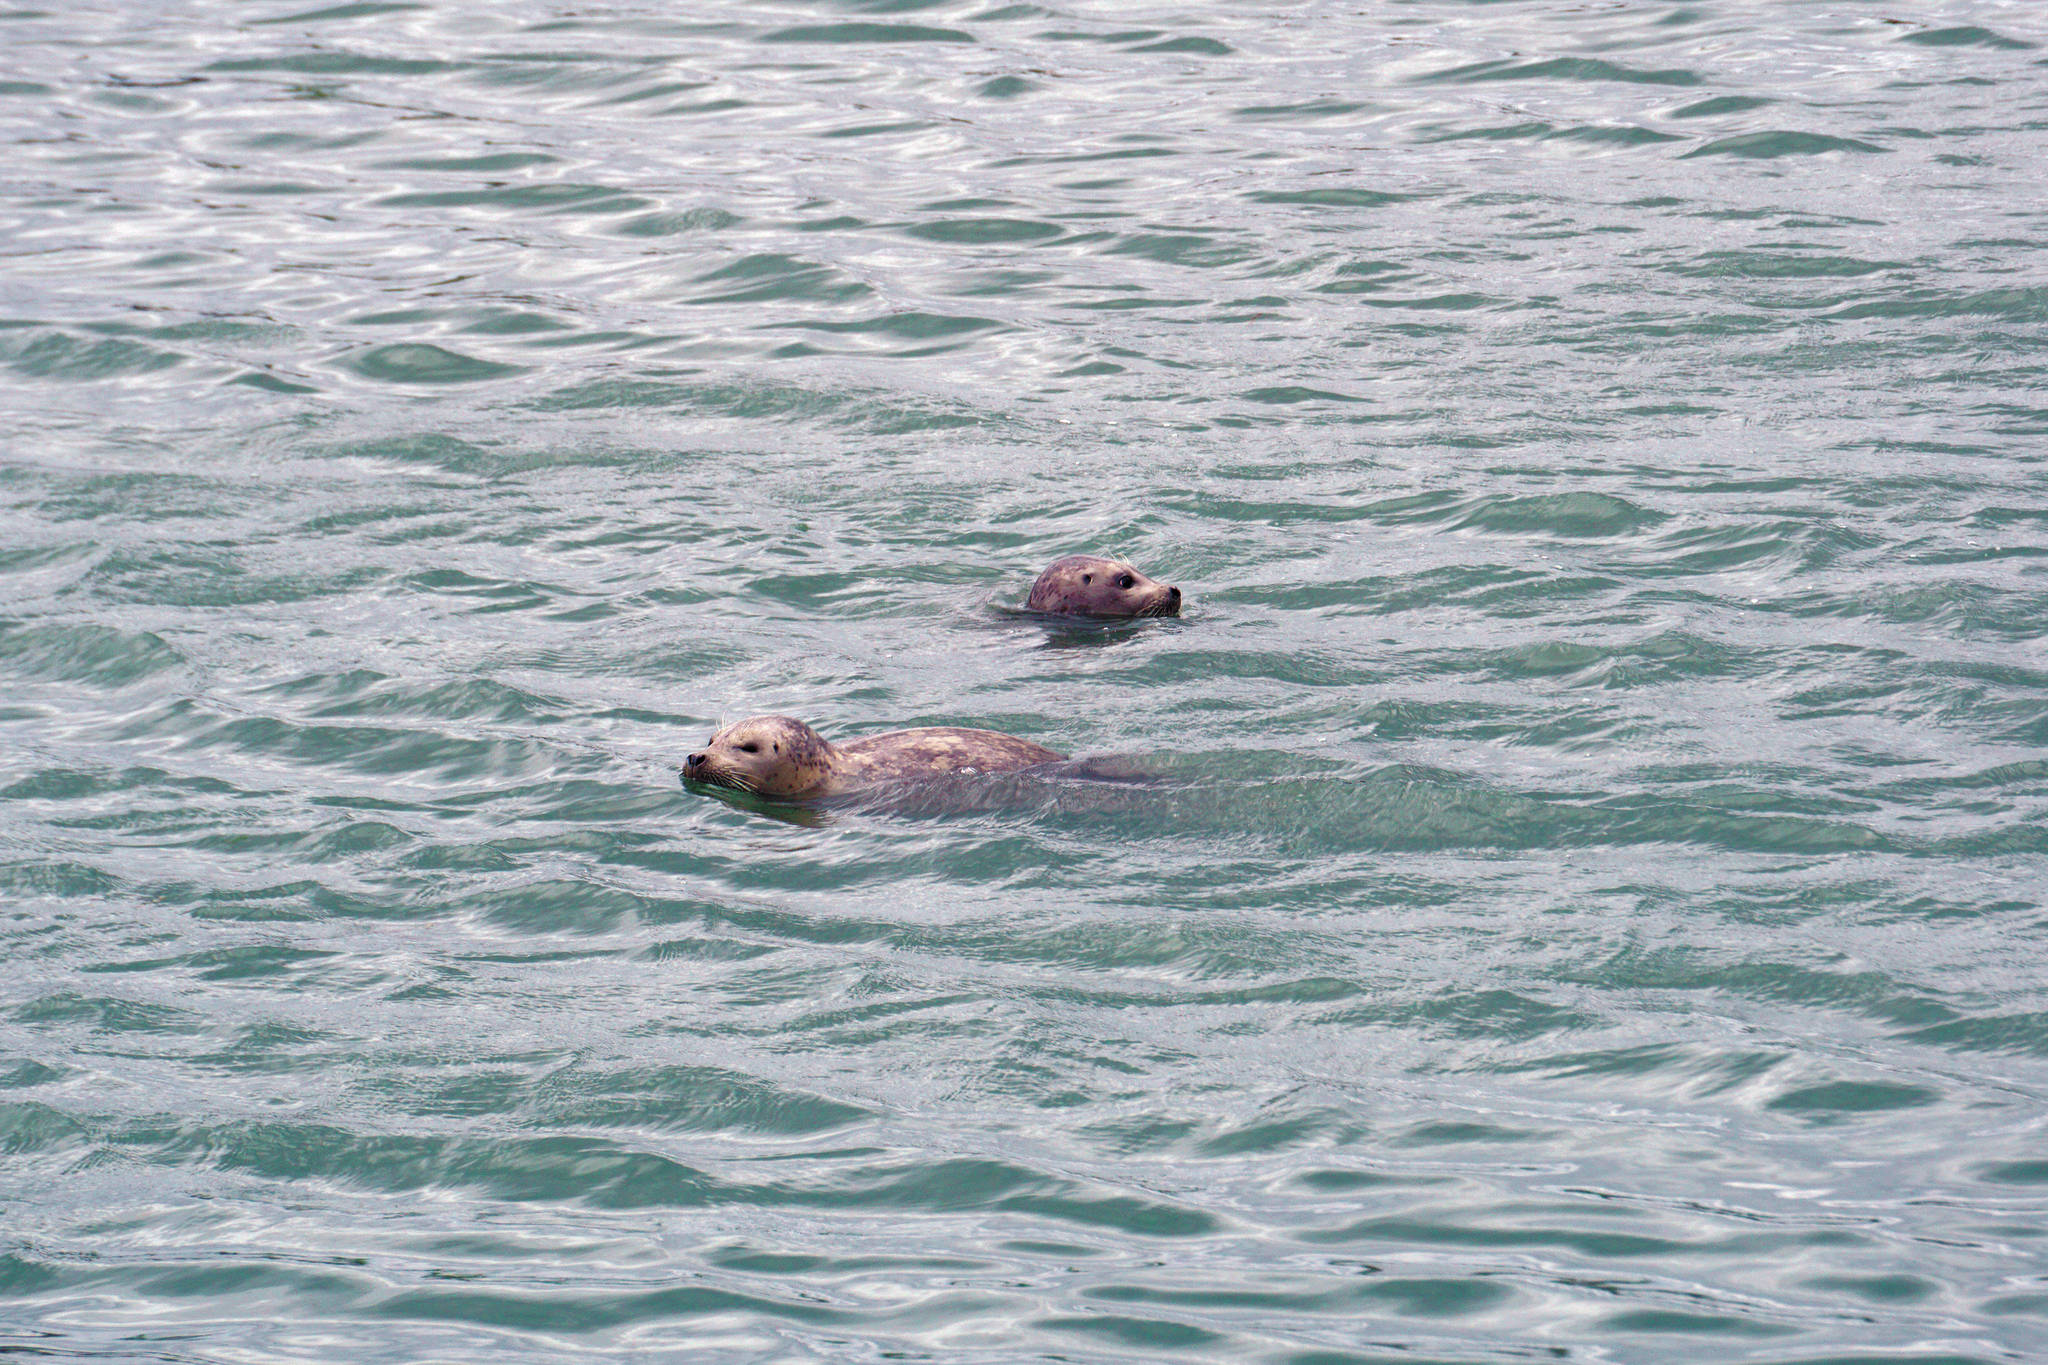 Two seals swim in the Nick Dudiak Fishing Lagoon on June 24, 2021, in Homer, Alaska. Seals sometimes will take salmon caught by fishermen at the popular fishing spot. (Photo by Michael Armstrong/Homer News)